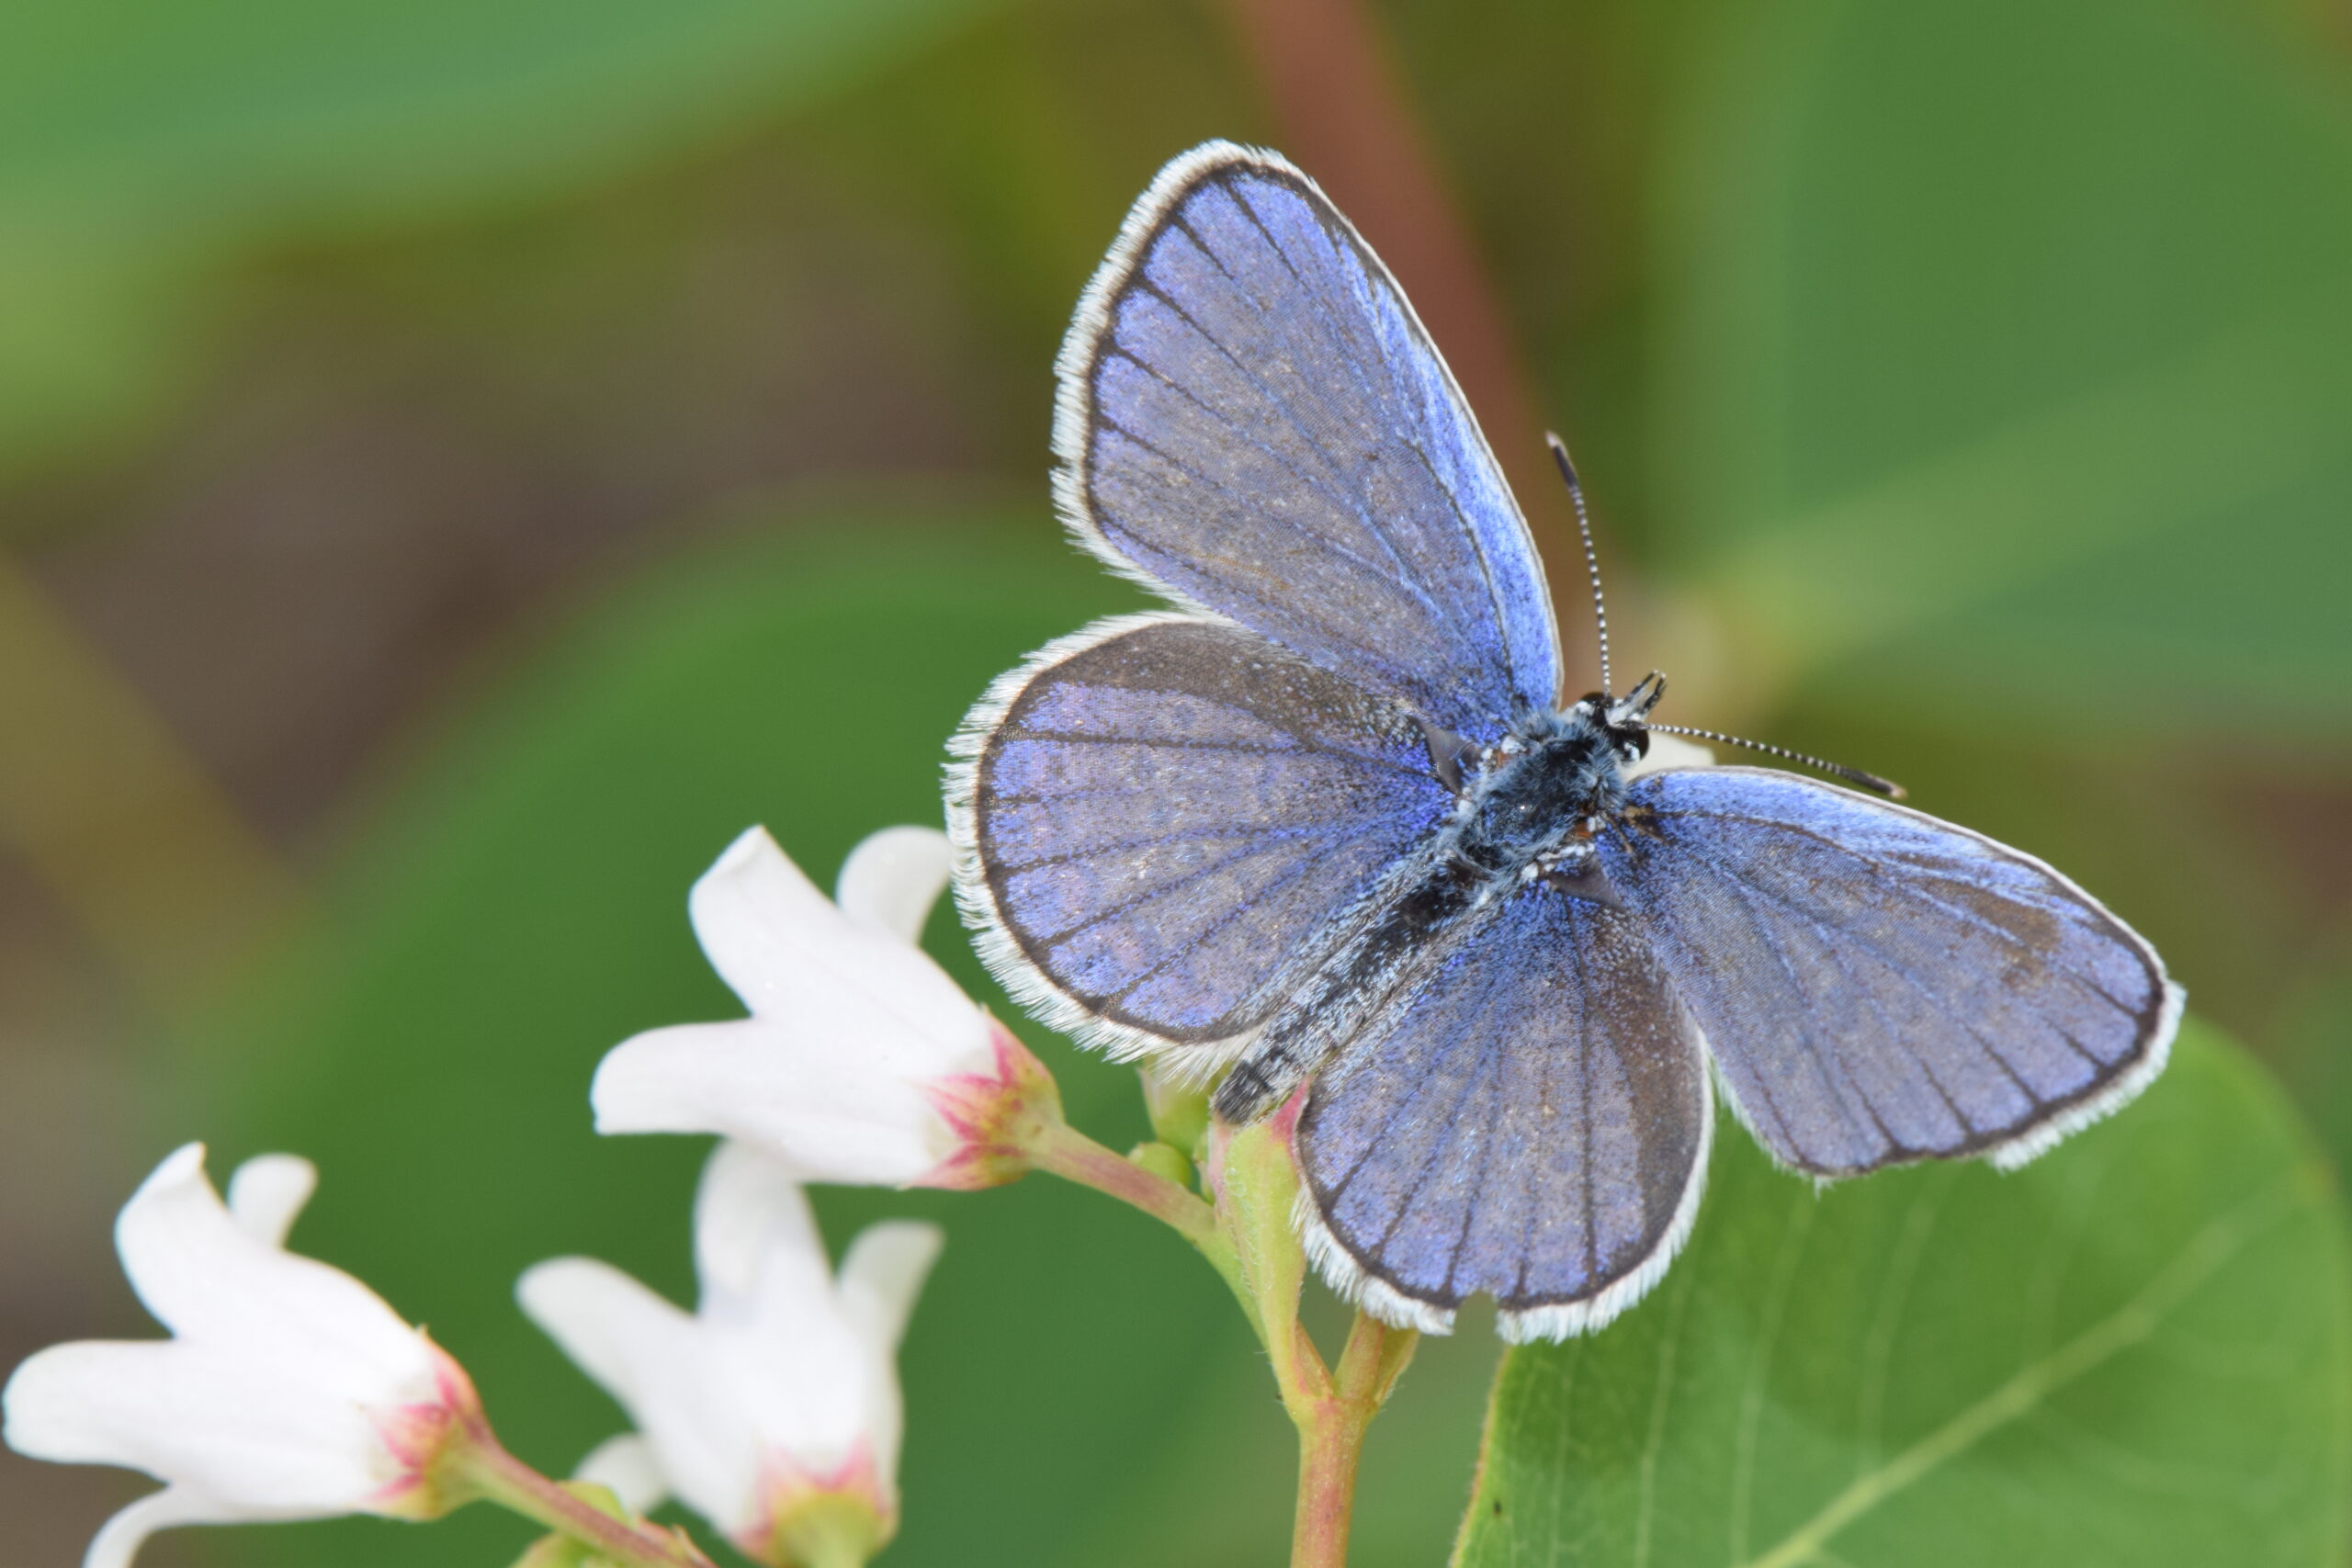 A periwinkle-colored butterfly rests on a flower stem.